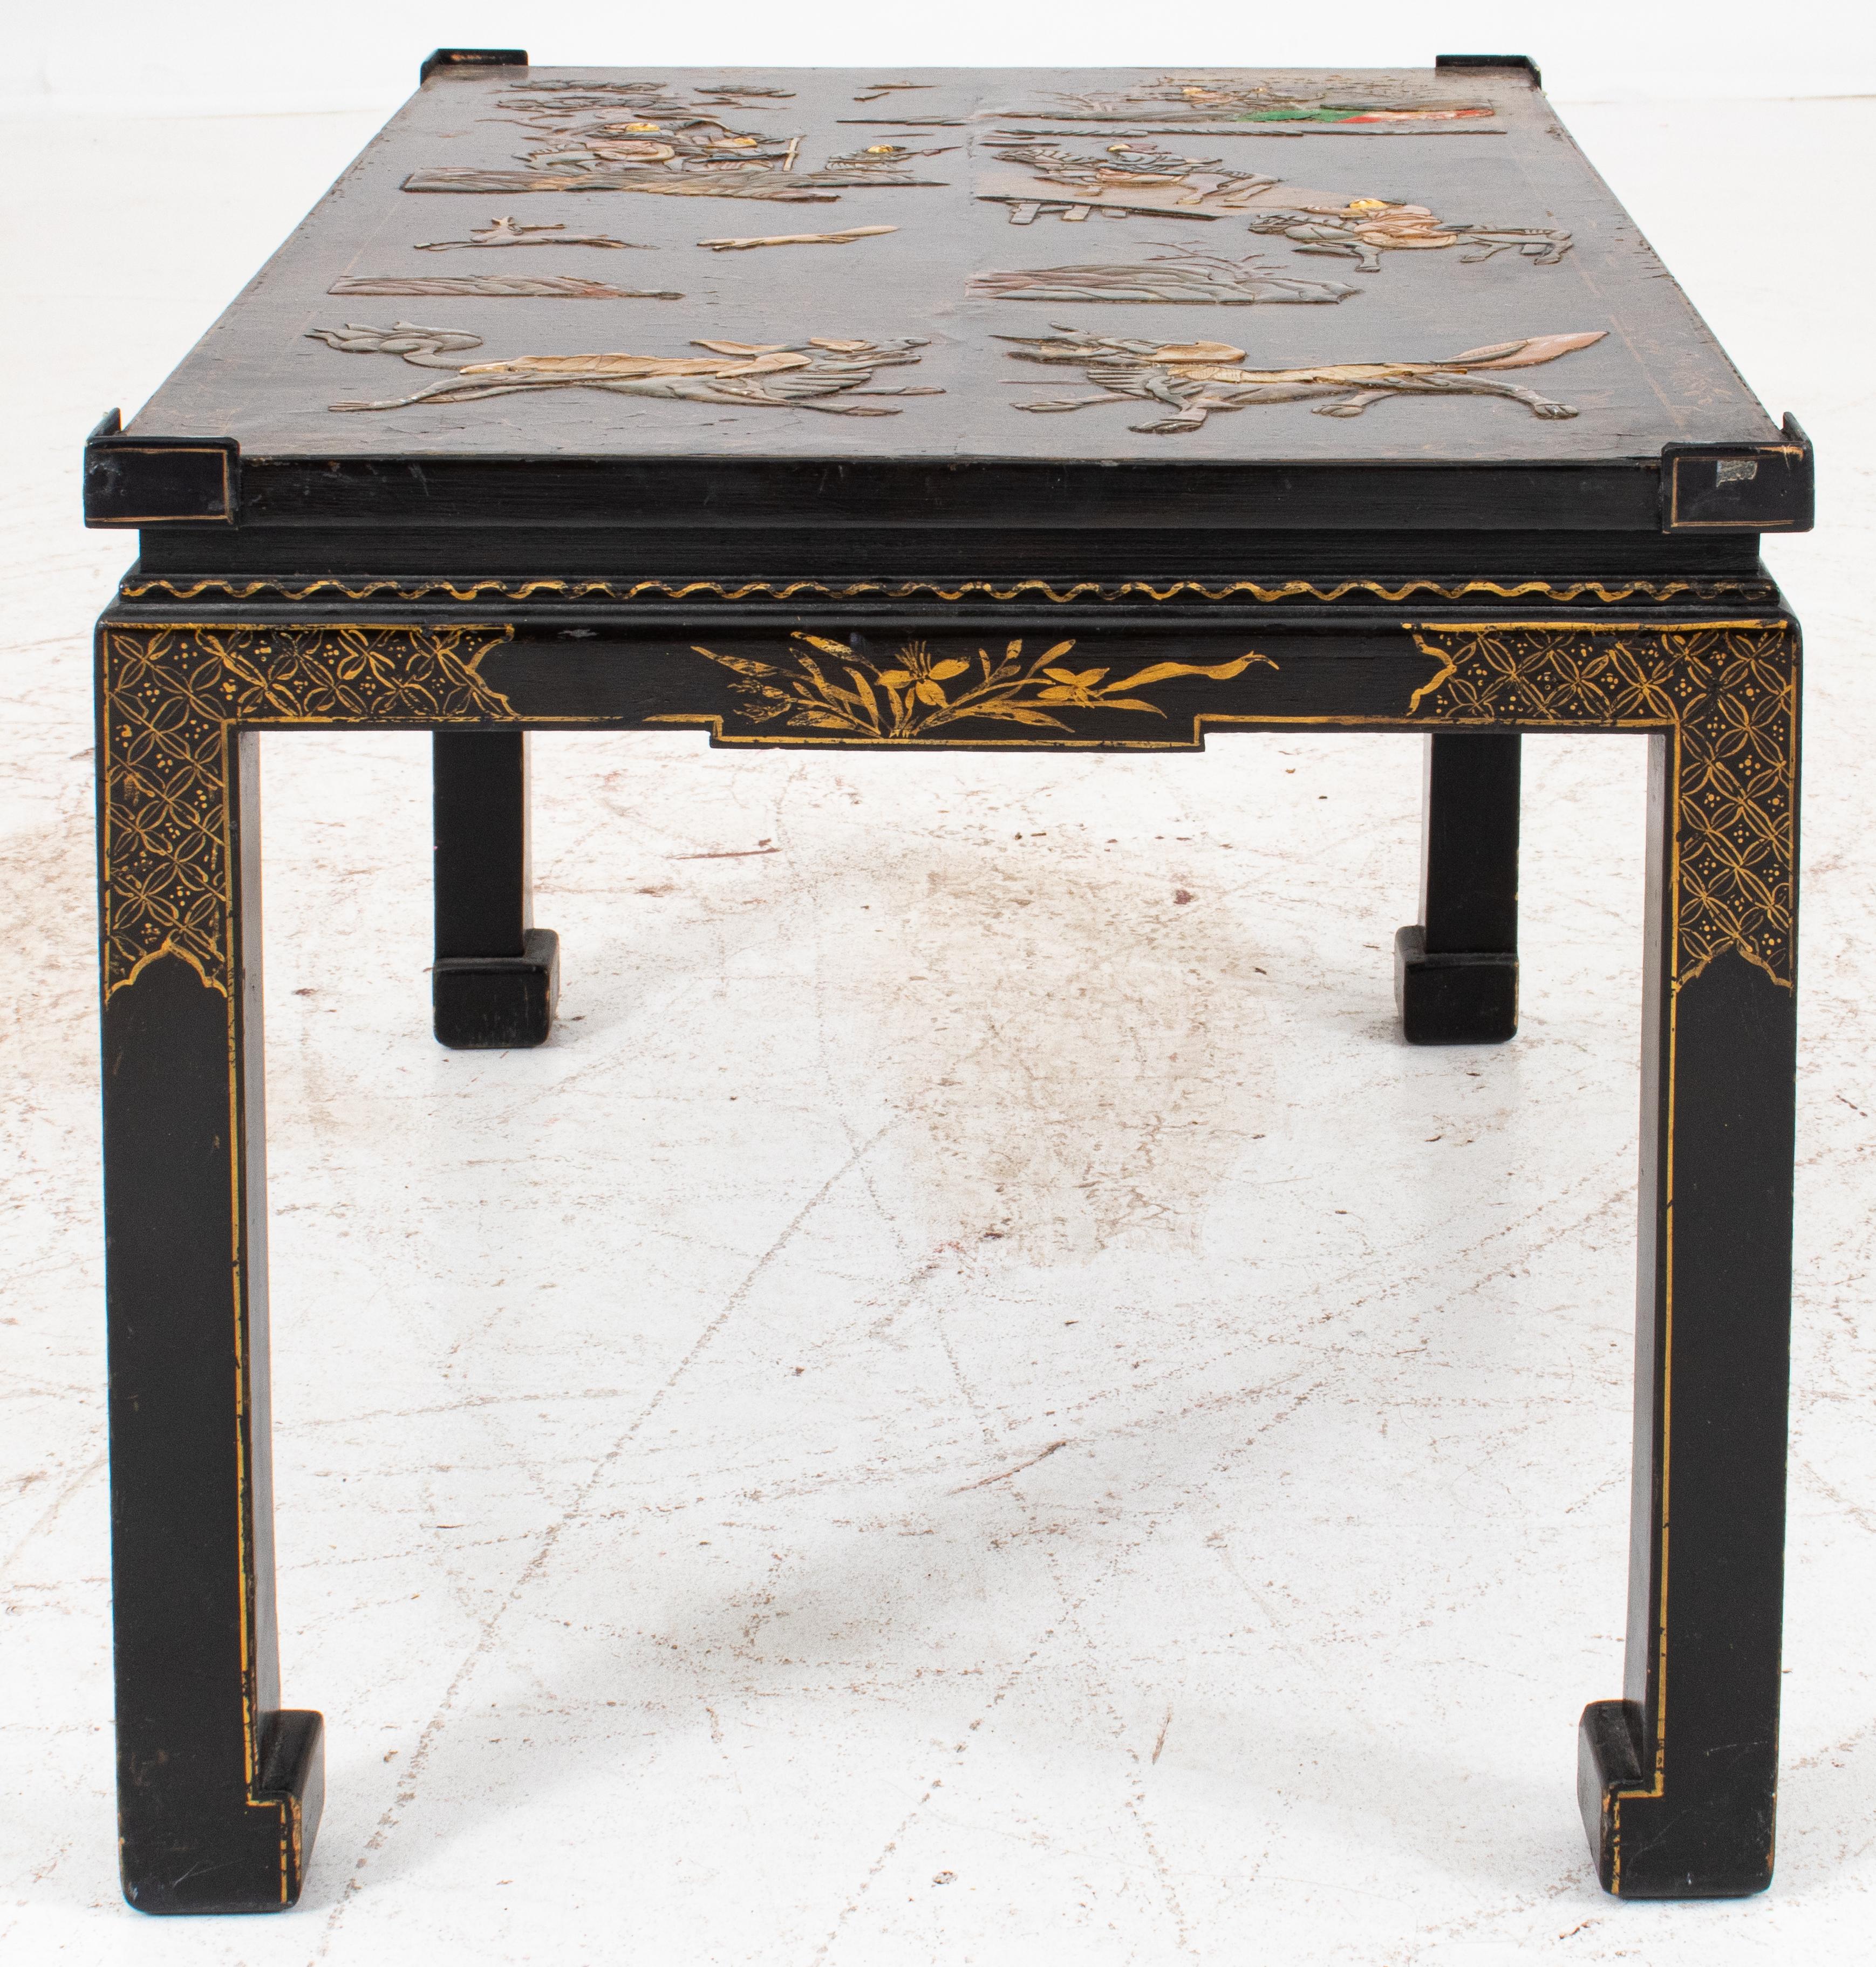 Stone Chinese Hardstone Inlaid Panel Mounted as a Table